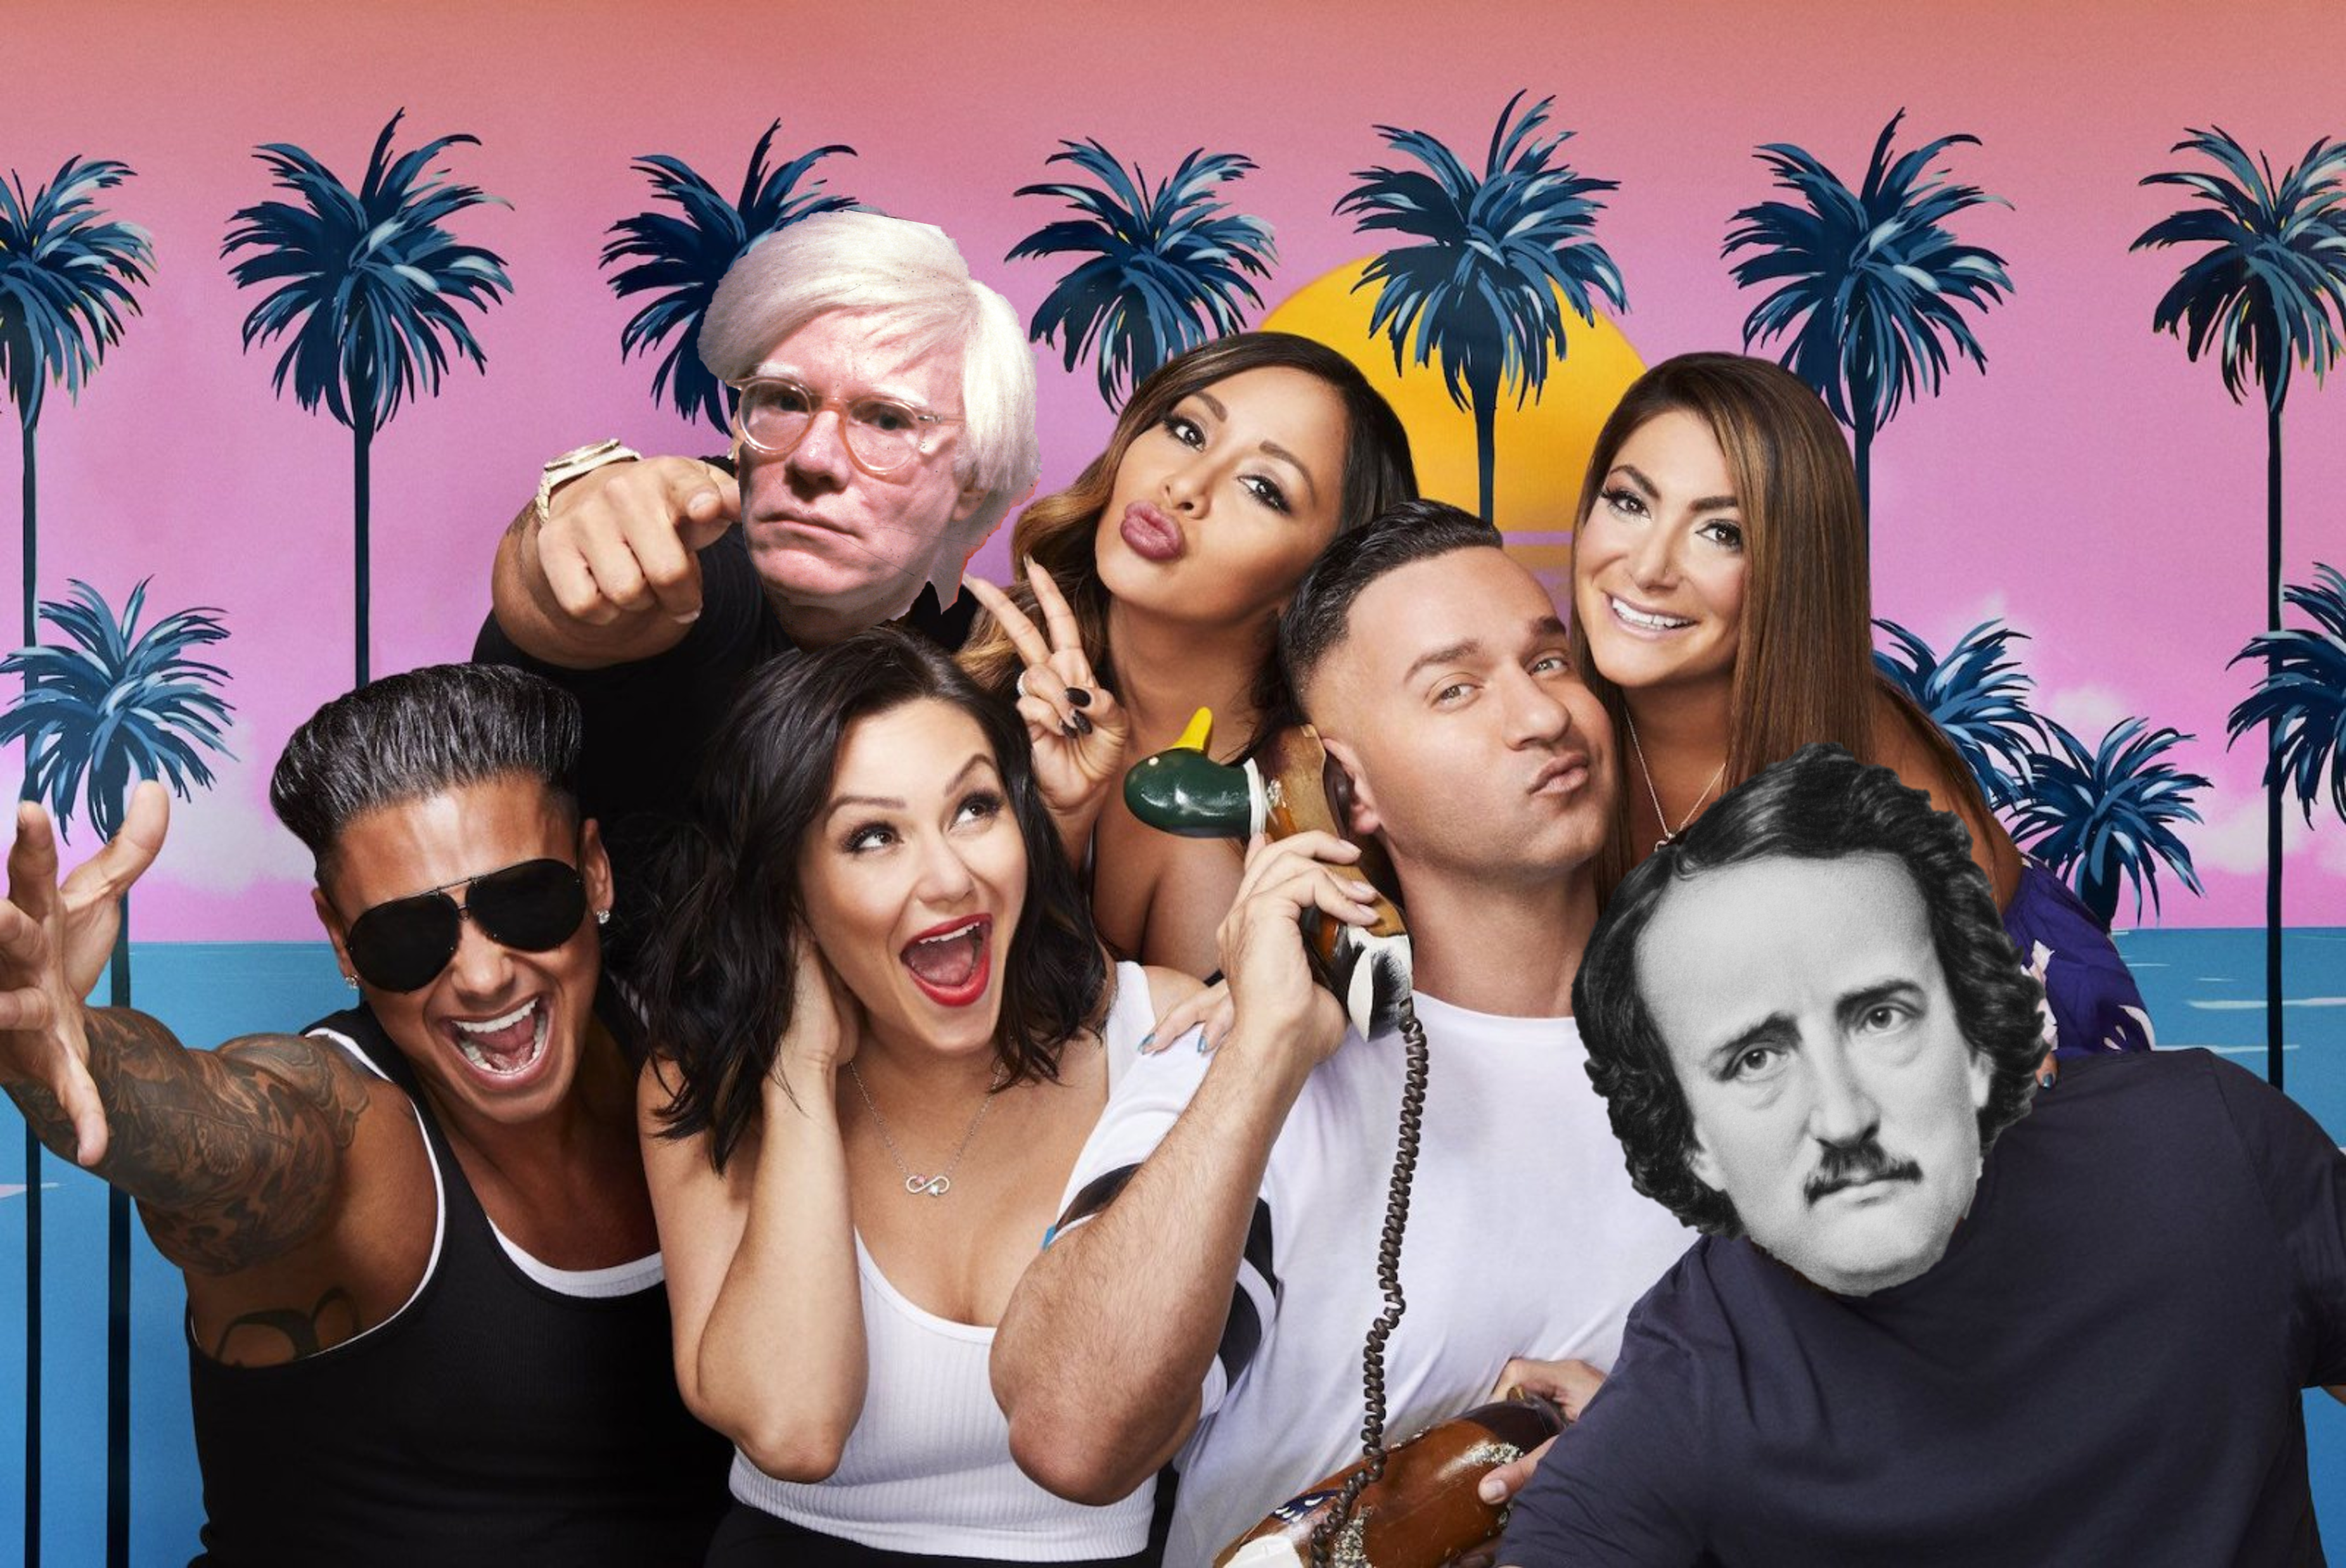 Andy Warhol, Edgar Allan Poe and the cast of the Jersey Shore in front a a pink background, with a sun and 5 palm trees.